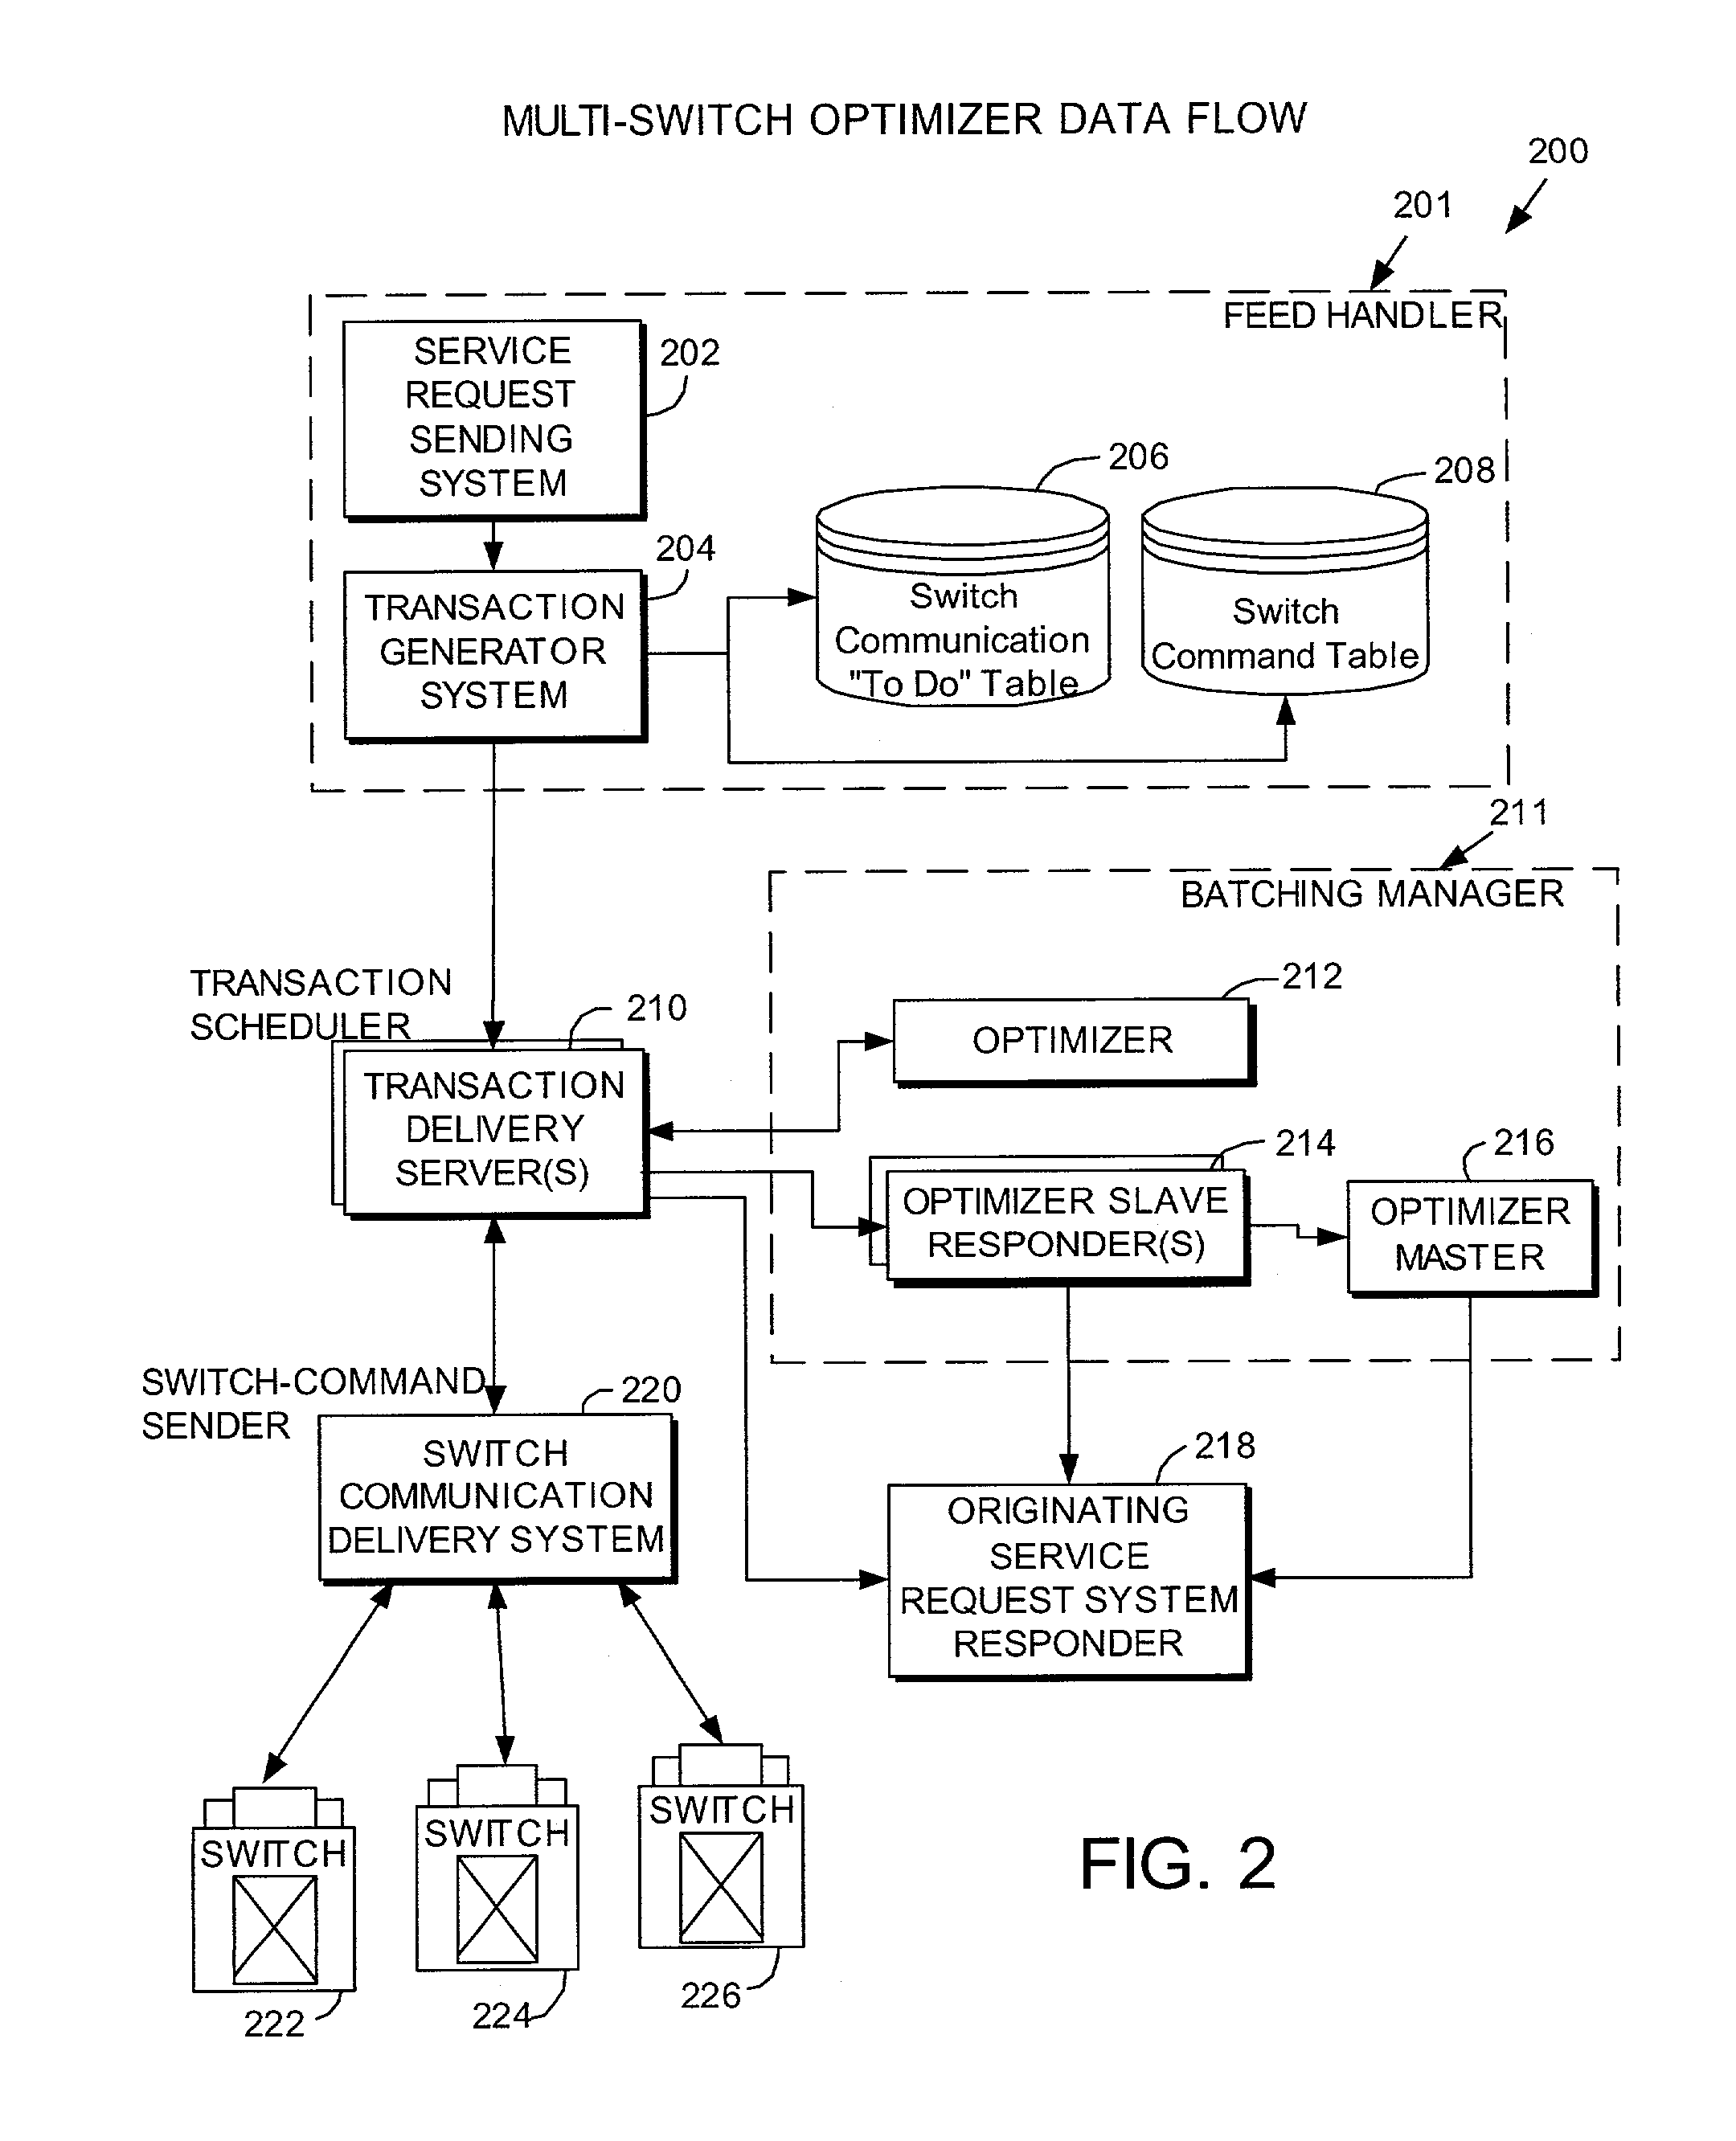 Method and system for optimizing switch-transaction processing in a telecommunications network